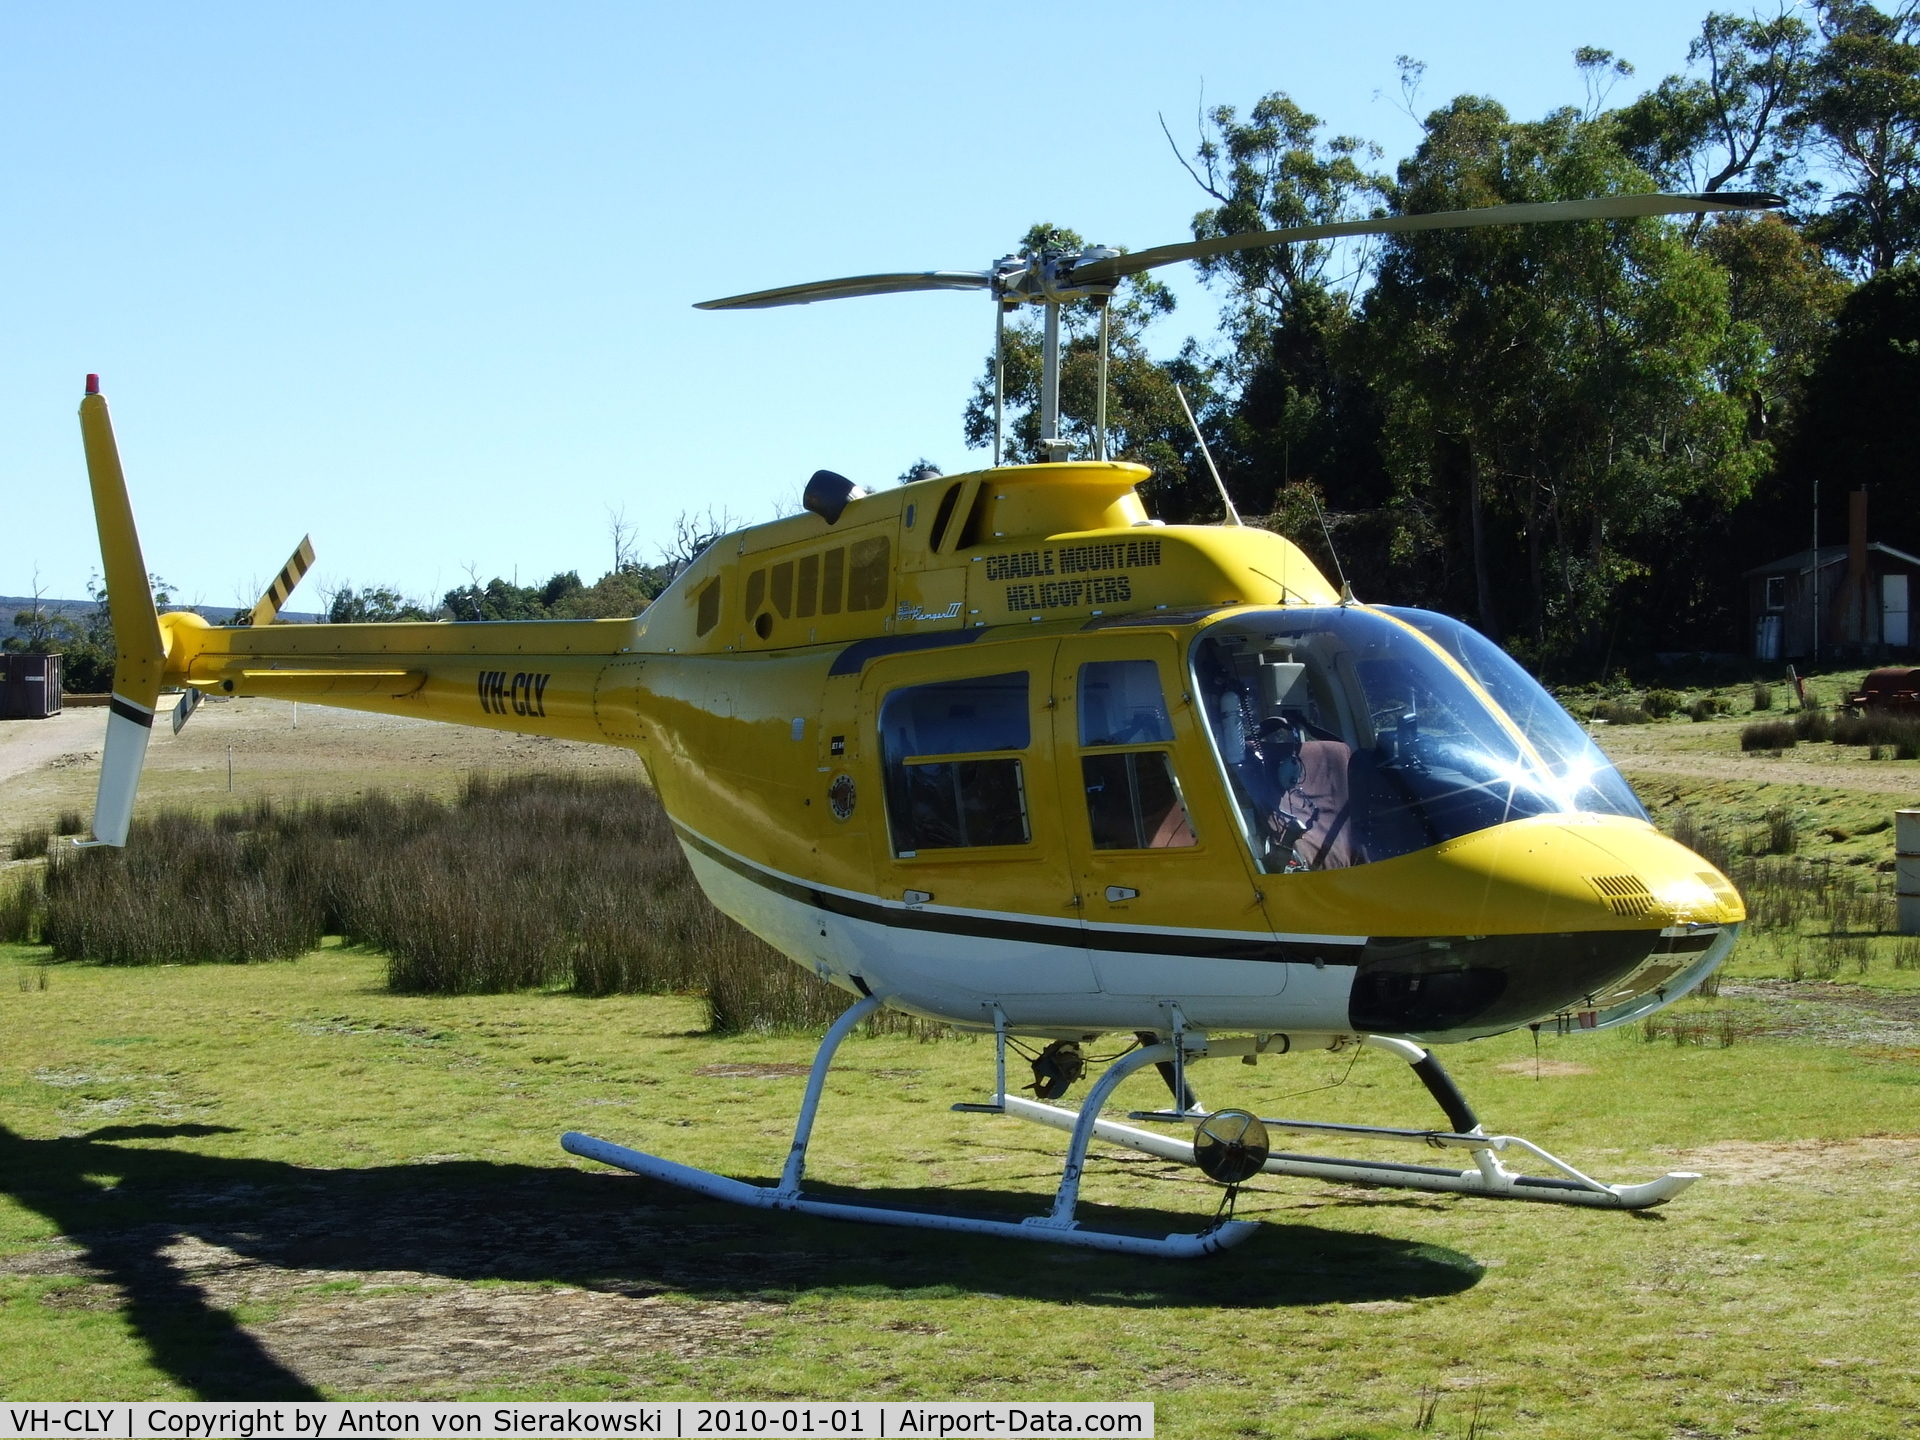 VH-CLY, 1995 Bell 206B-3 JetRanger III C/N 4364, At Cradle Mountain Heliport about 5NM North of Cradle Mountain